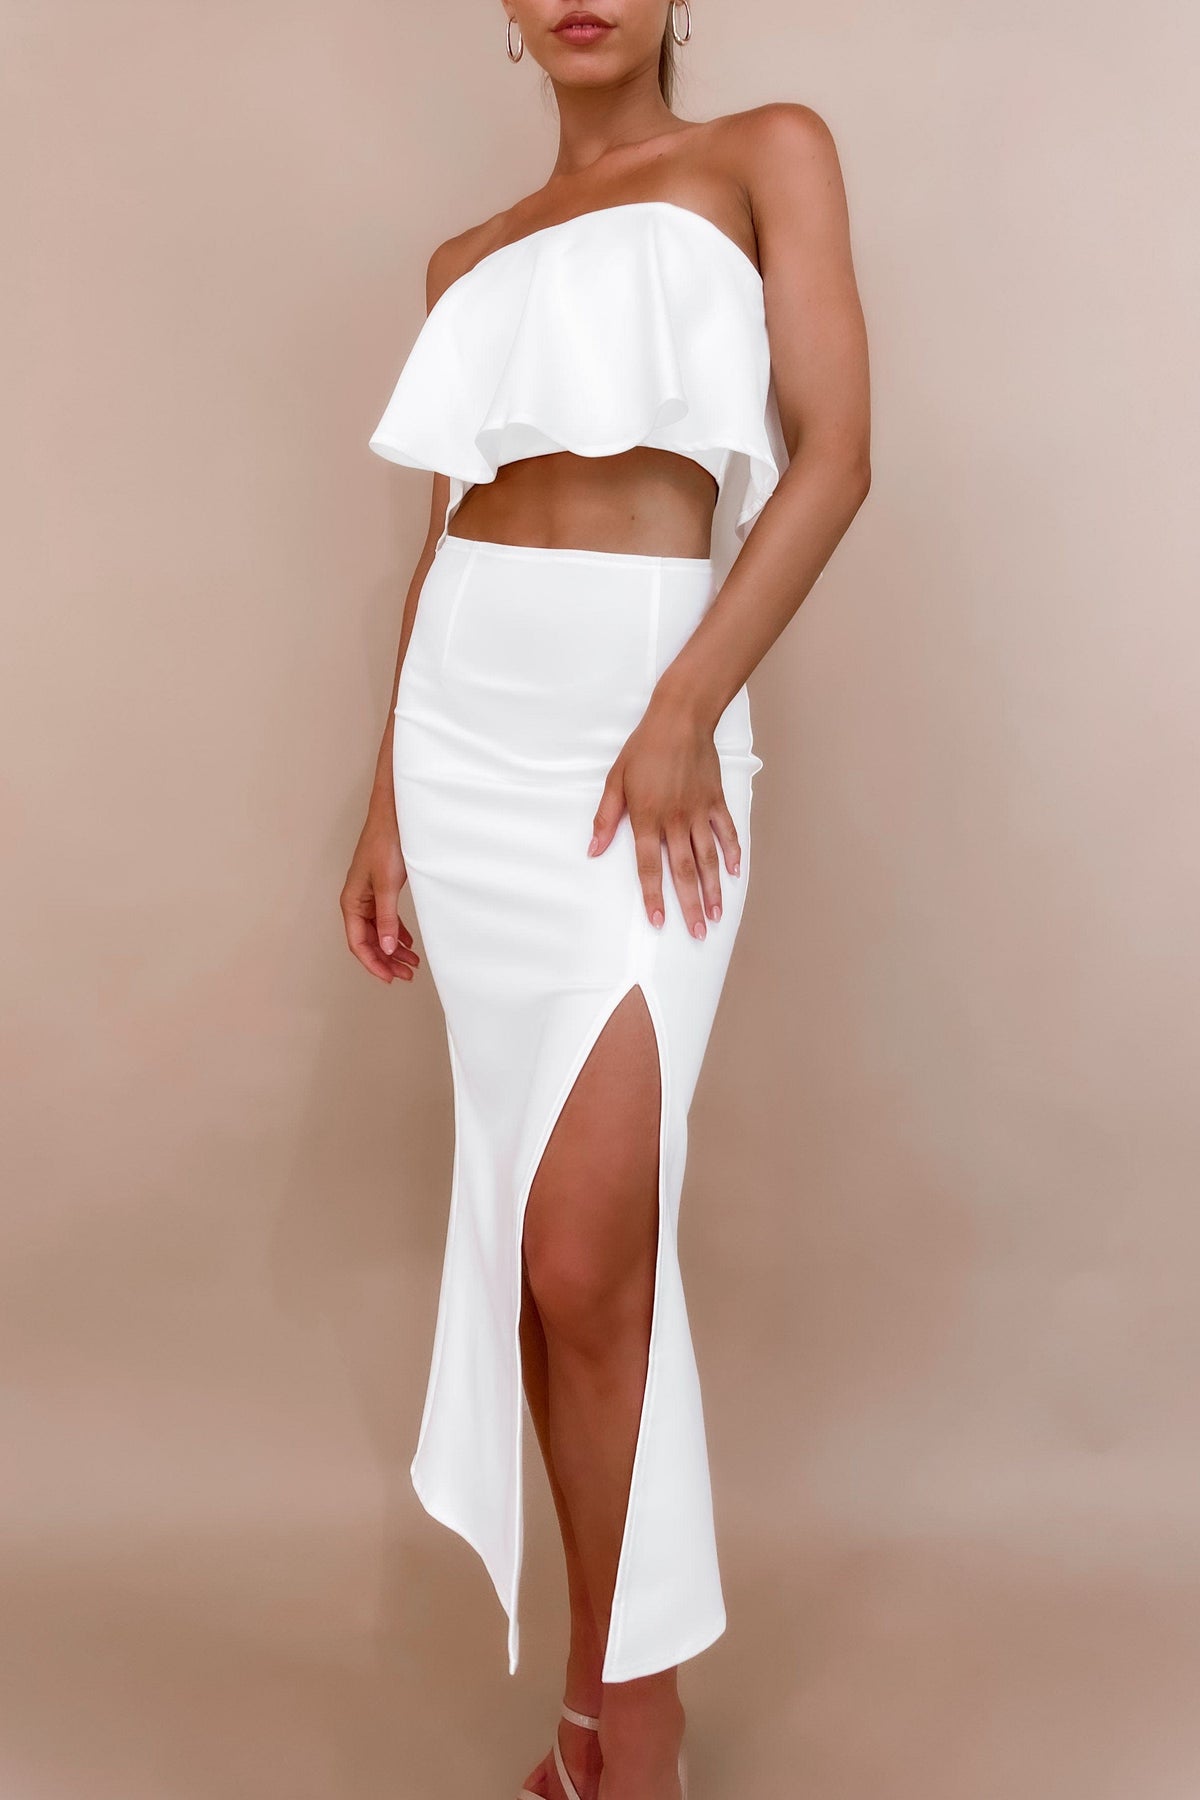 Mellie Set, BOTTOMS, CROP TOP, CROP TOPS, HIGH WAISTED SETS, MIDI SKIRT, new arrivals, POLYESTER &amp; SPANDEX, POLYESTER AND SPANDEX, SETS, SKIRTS, SPANDEX AND POLYESTER, TOP, TOPS, WHITE, , -MISHKAH